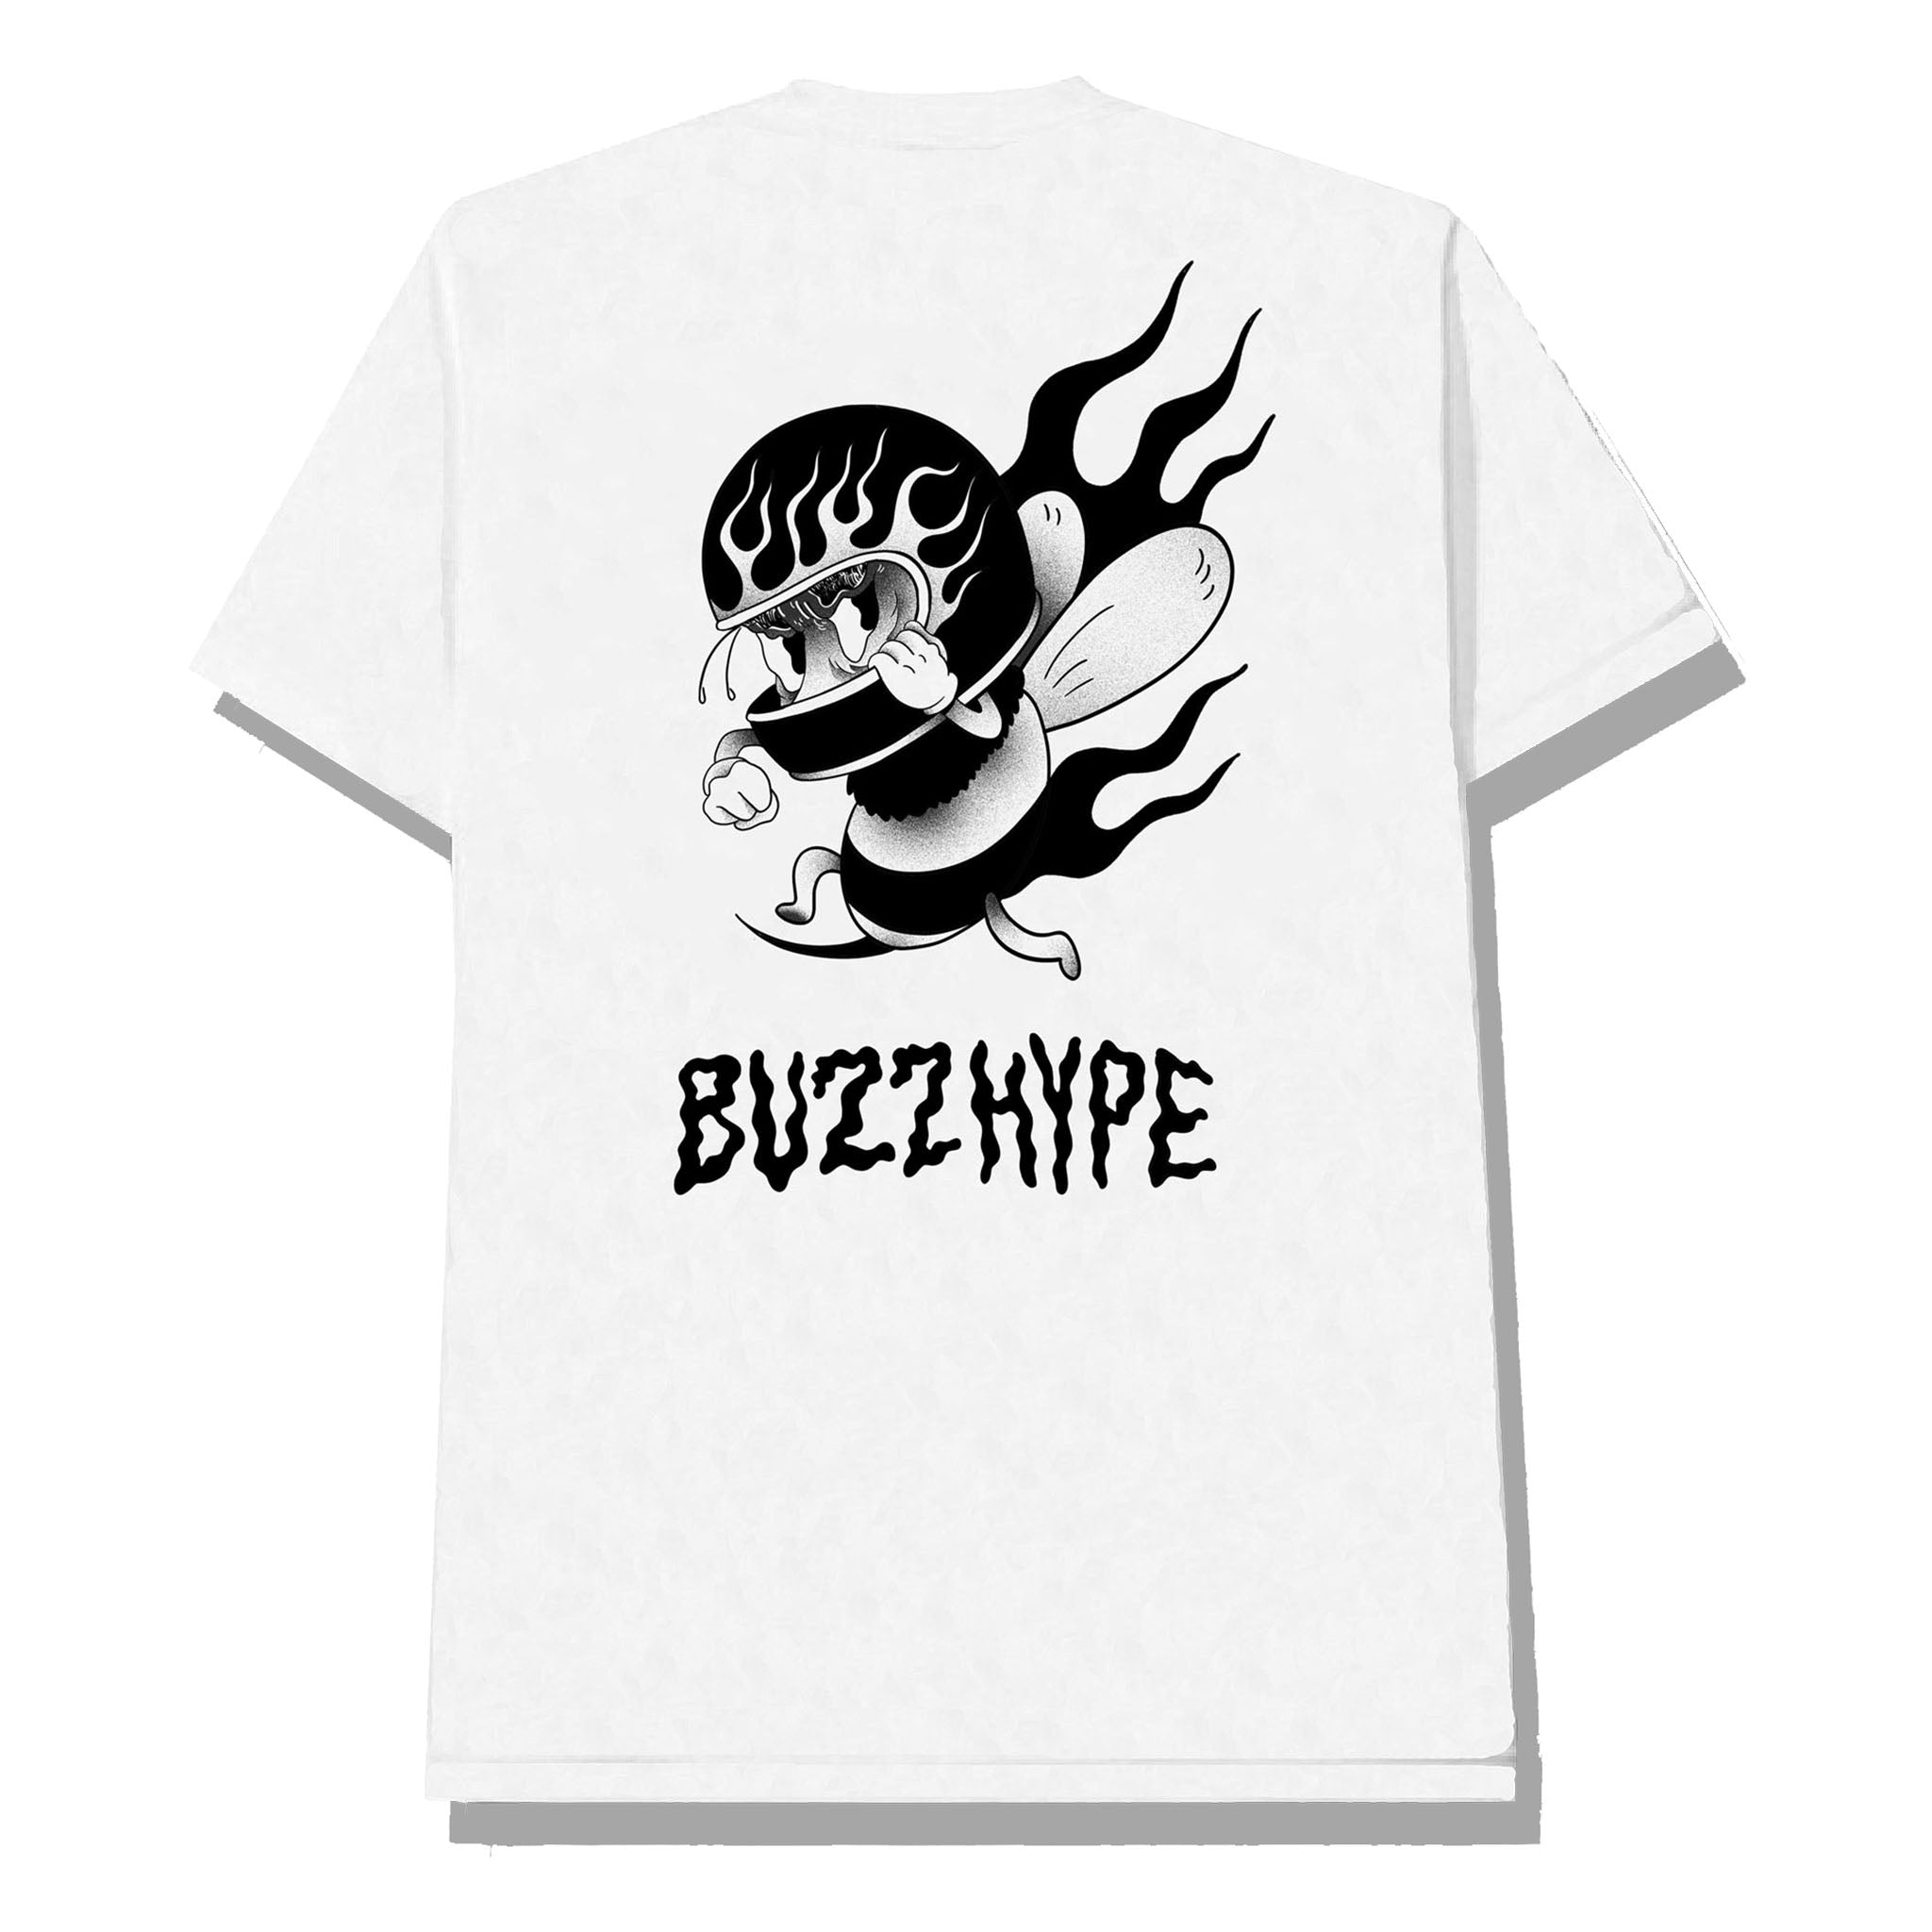 Flaming Bee in White tee